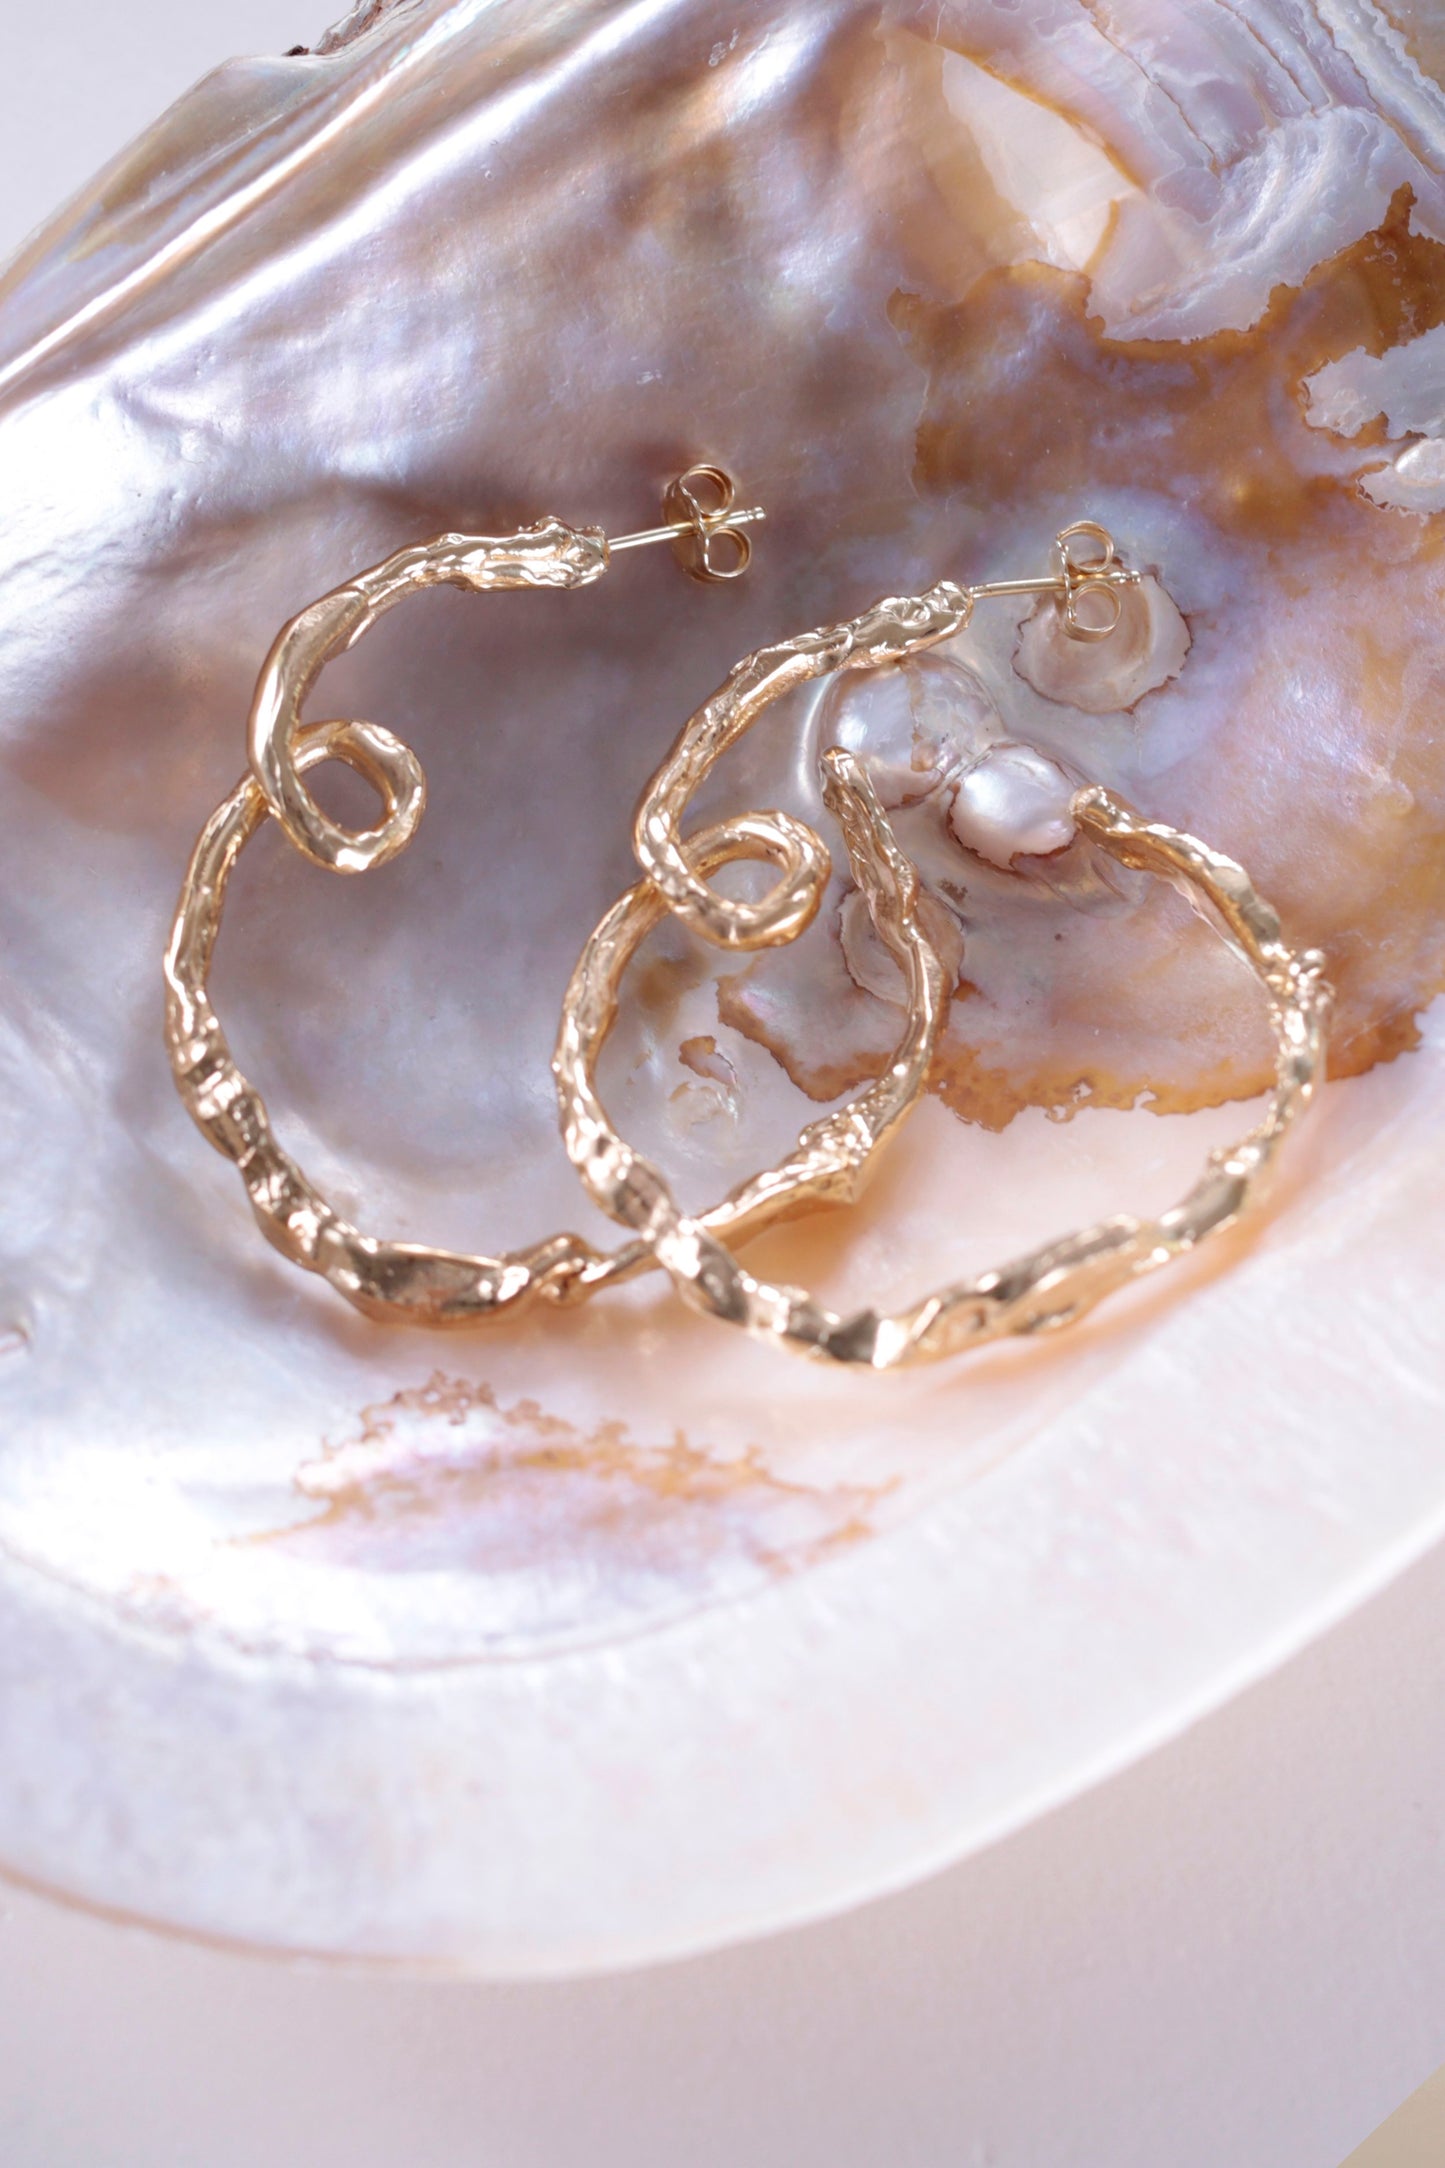 18K Gold Vermeil CLARK Medusa Curl Hoop earrings delicately laid side by side in an iridescent shell. The unique design is hand made using the lost wax casting method. 